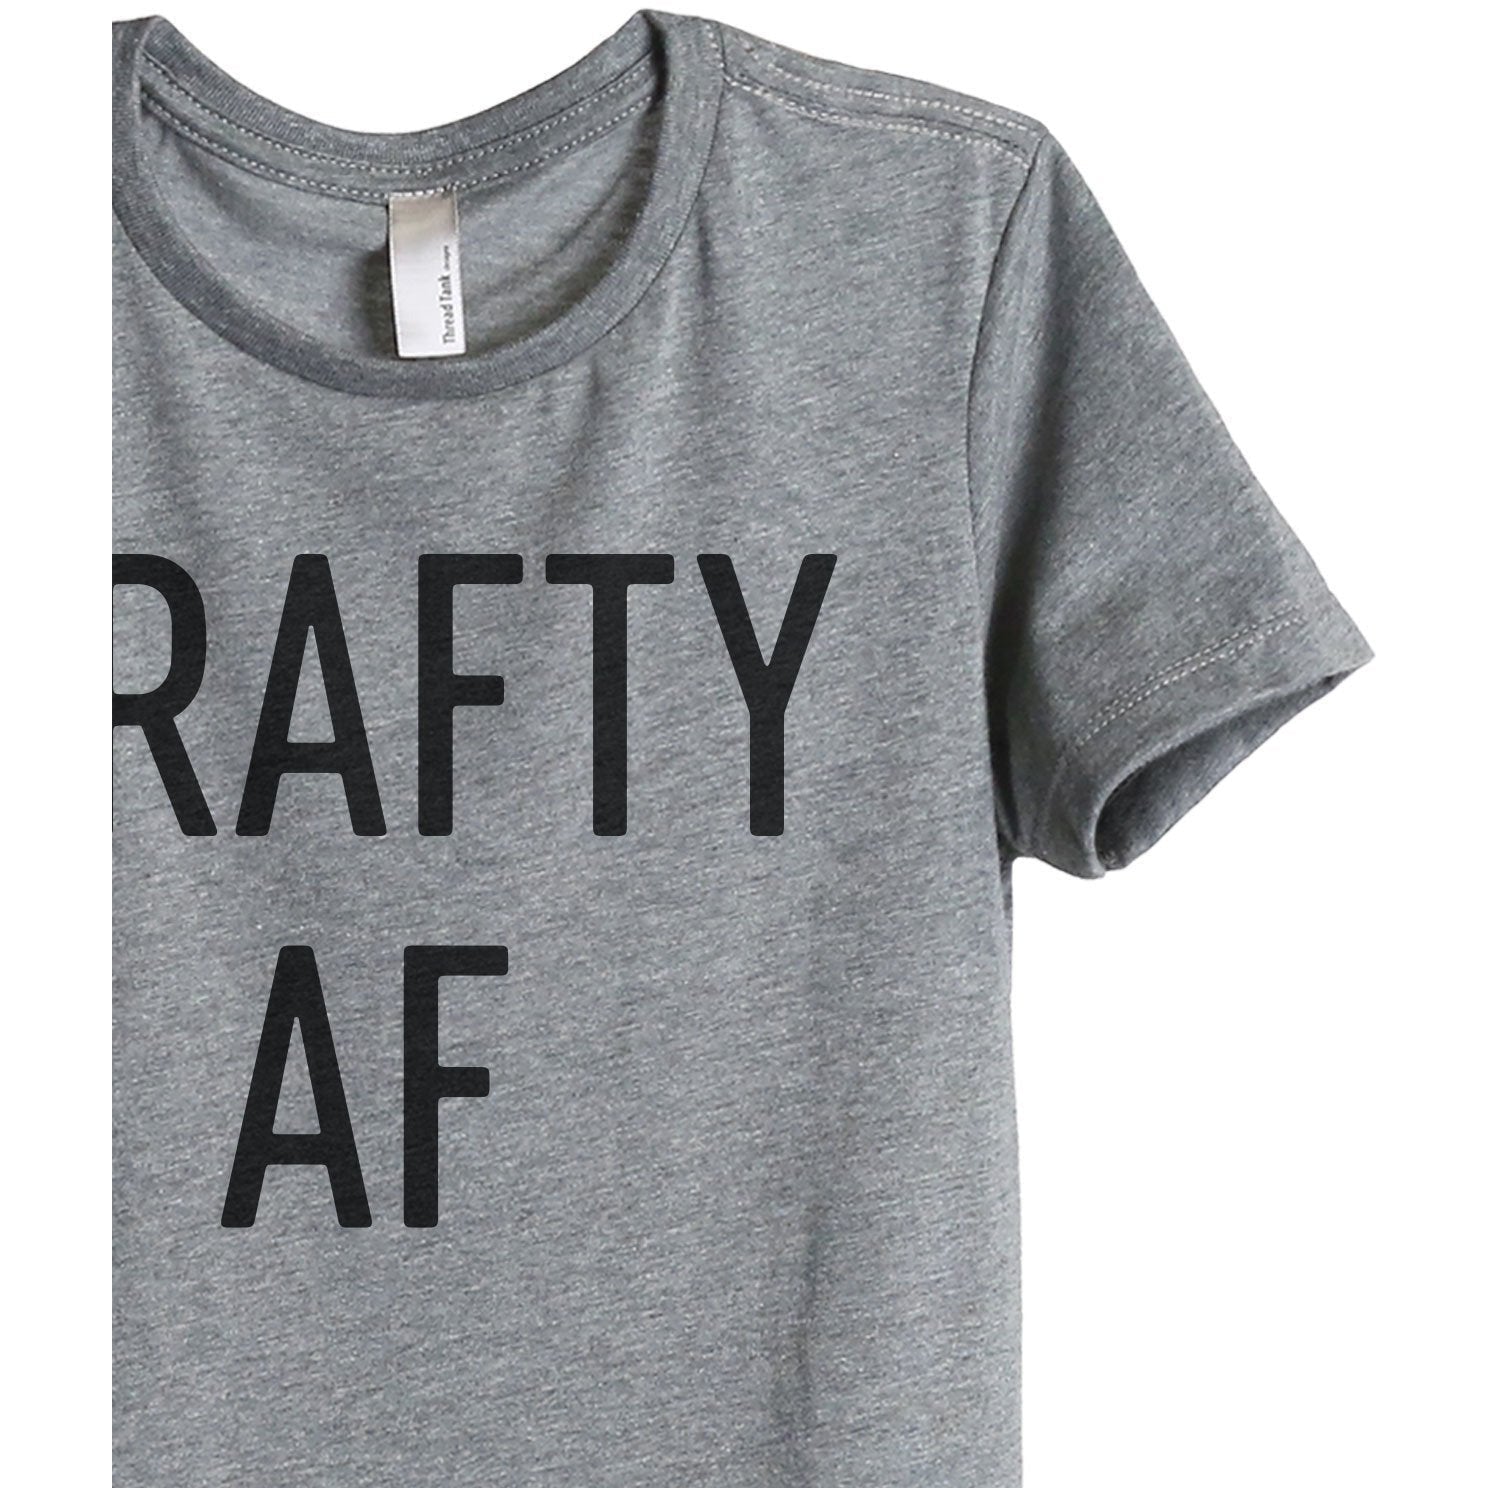 Crafty AF Women's Relaxed Crewneck T-Shirt Top Tee Heather Grey Zoom Details
